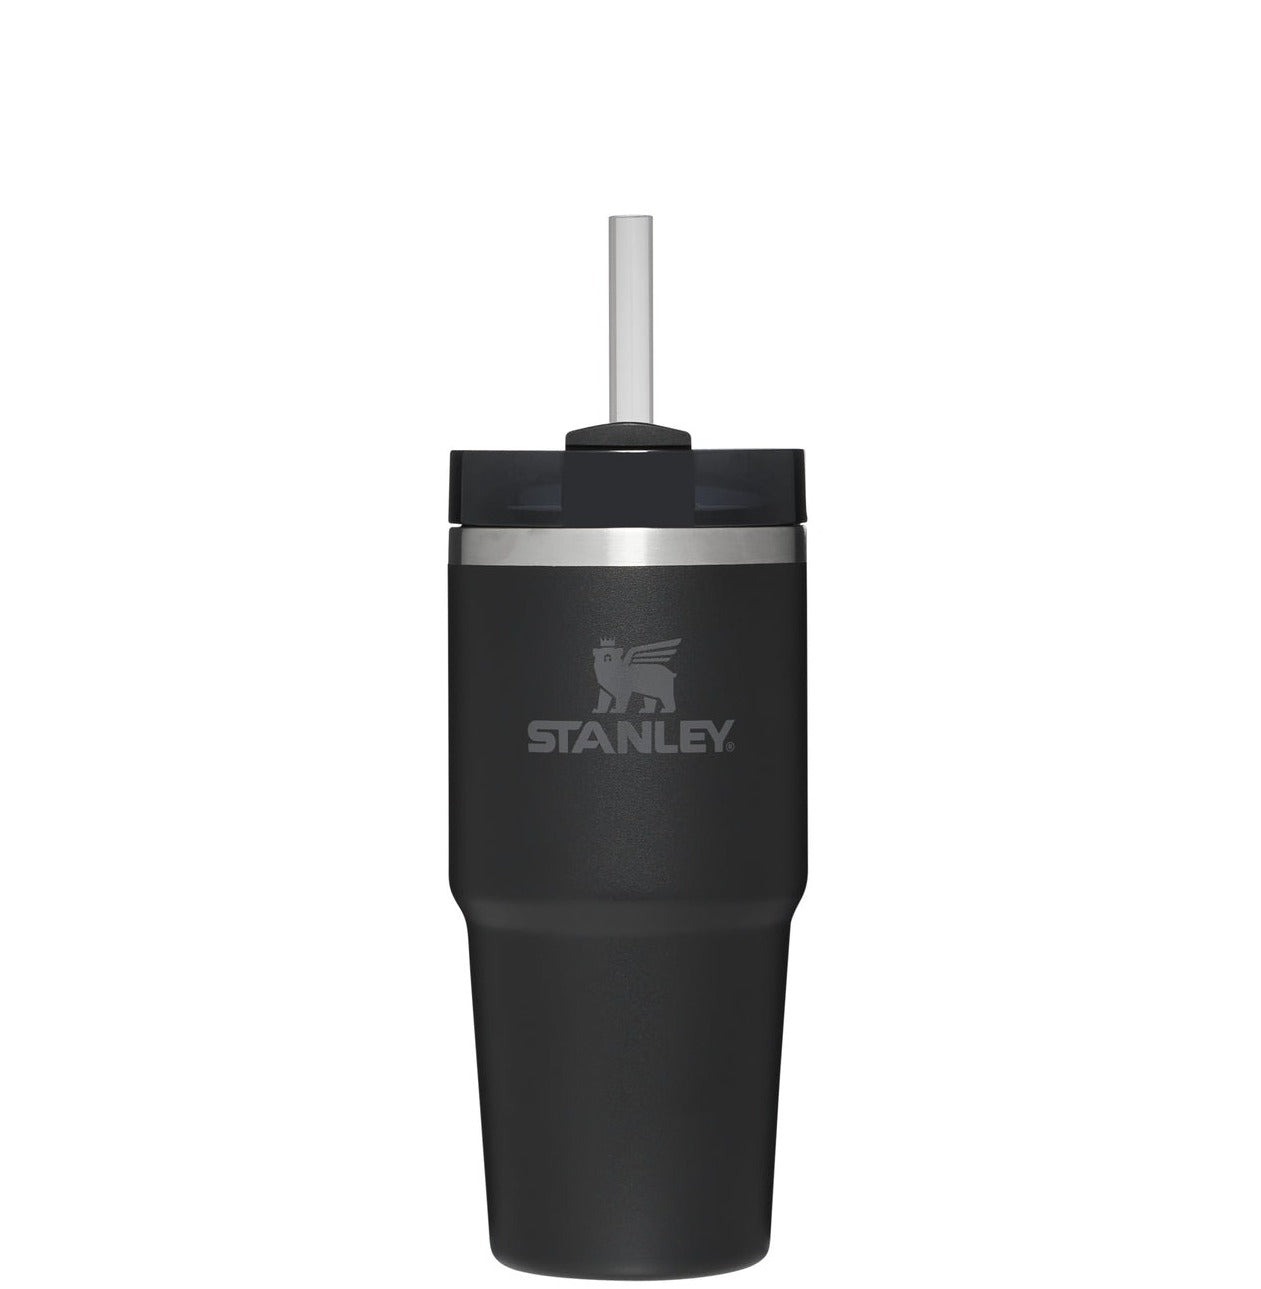 Stanley's latest Quencher tumblers come in 2 new festive shades